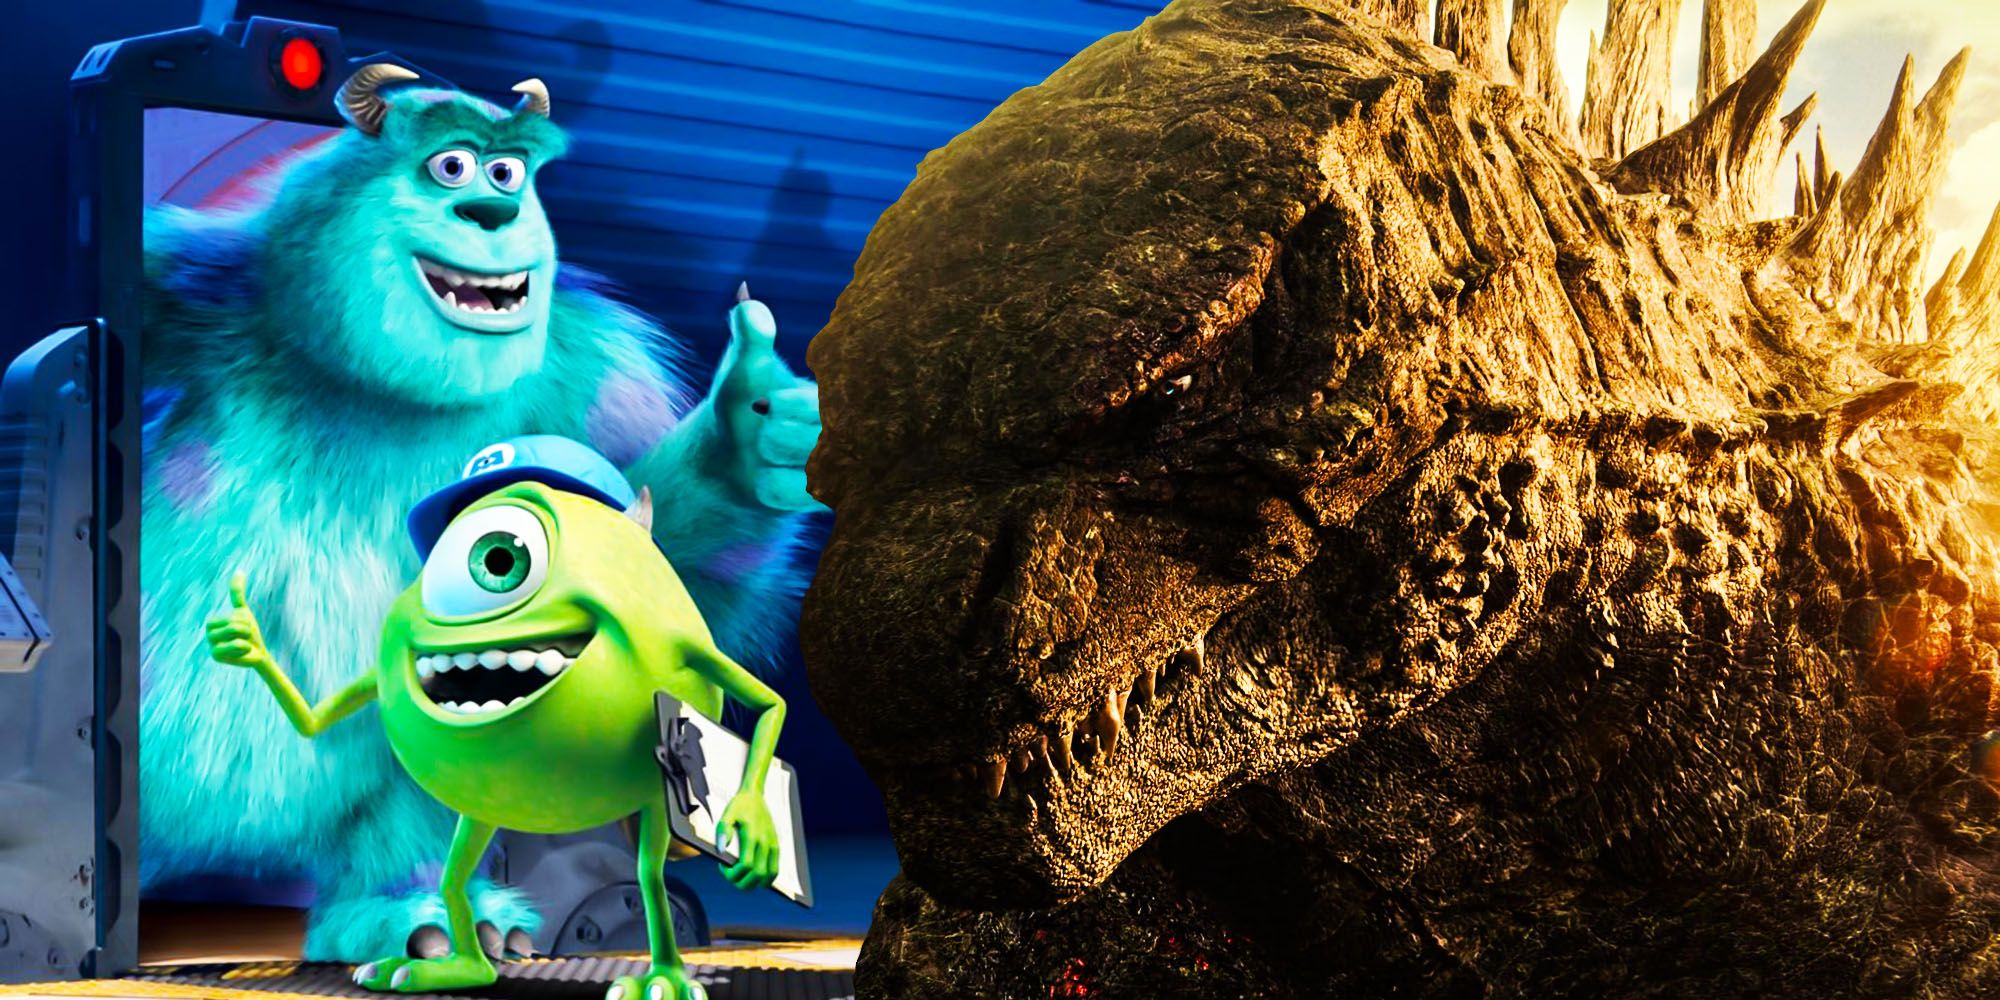 Monsters Incs Planned Godzilla Cameo (& Why Pixar Couldnt Do It)